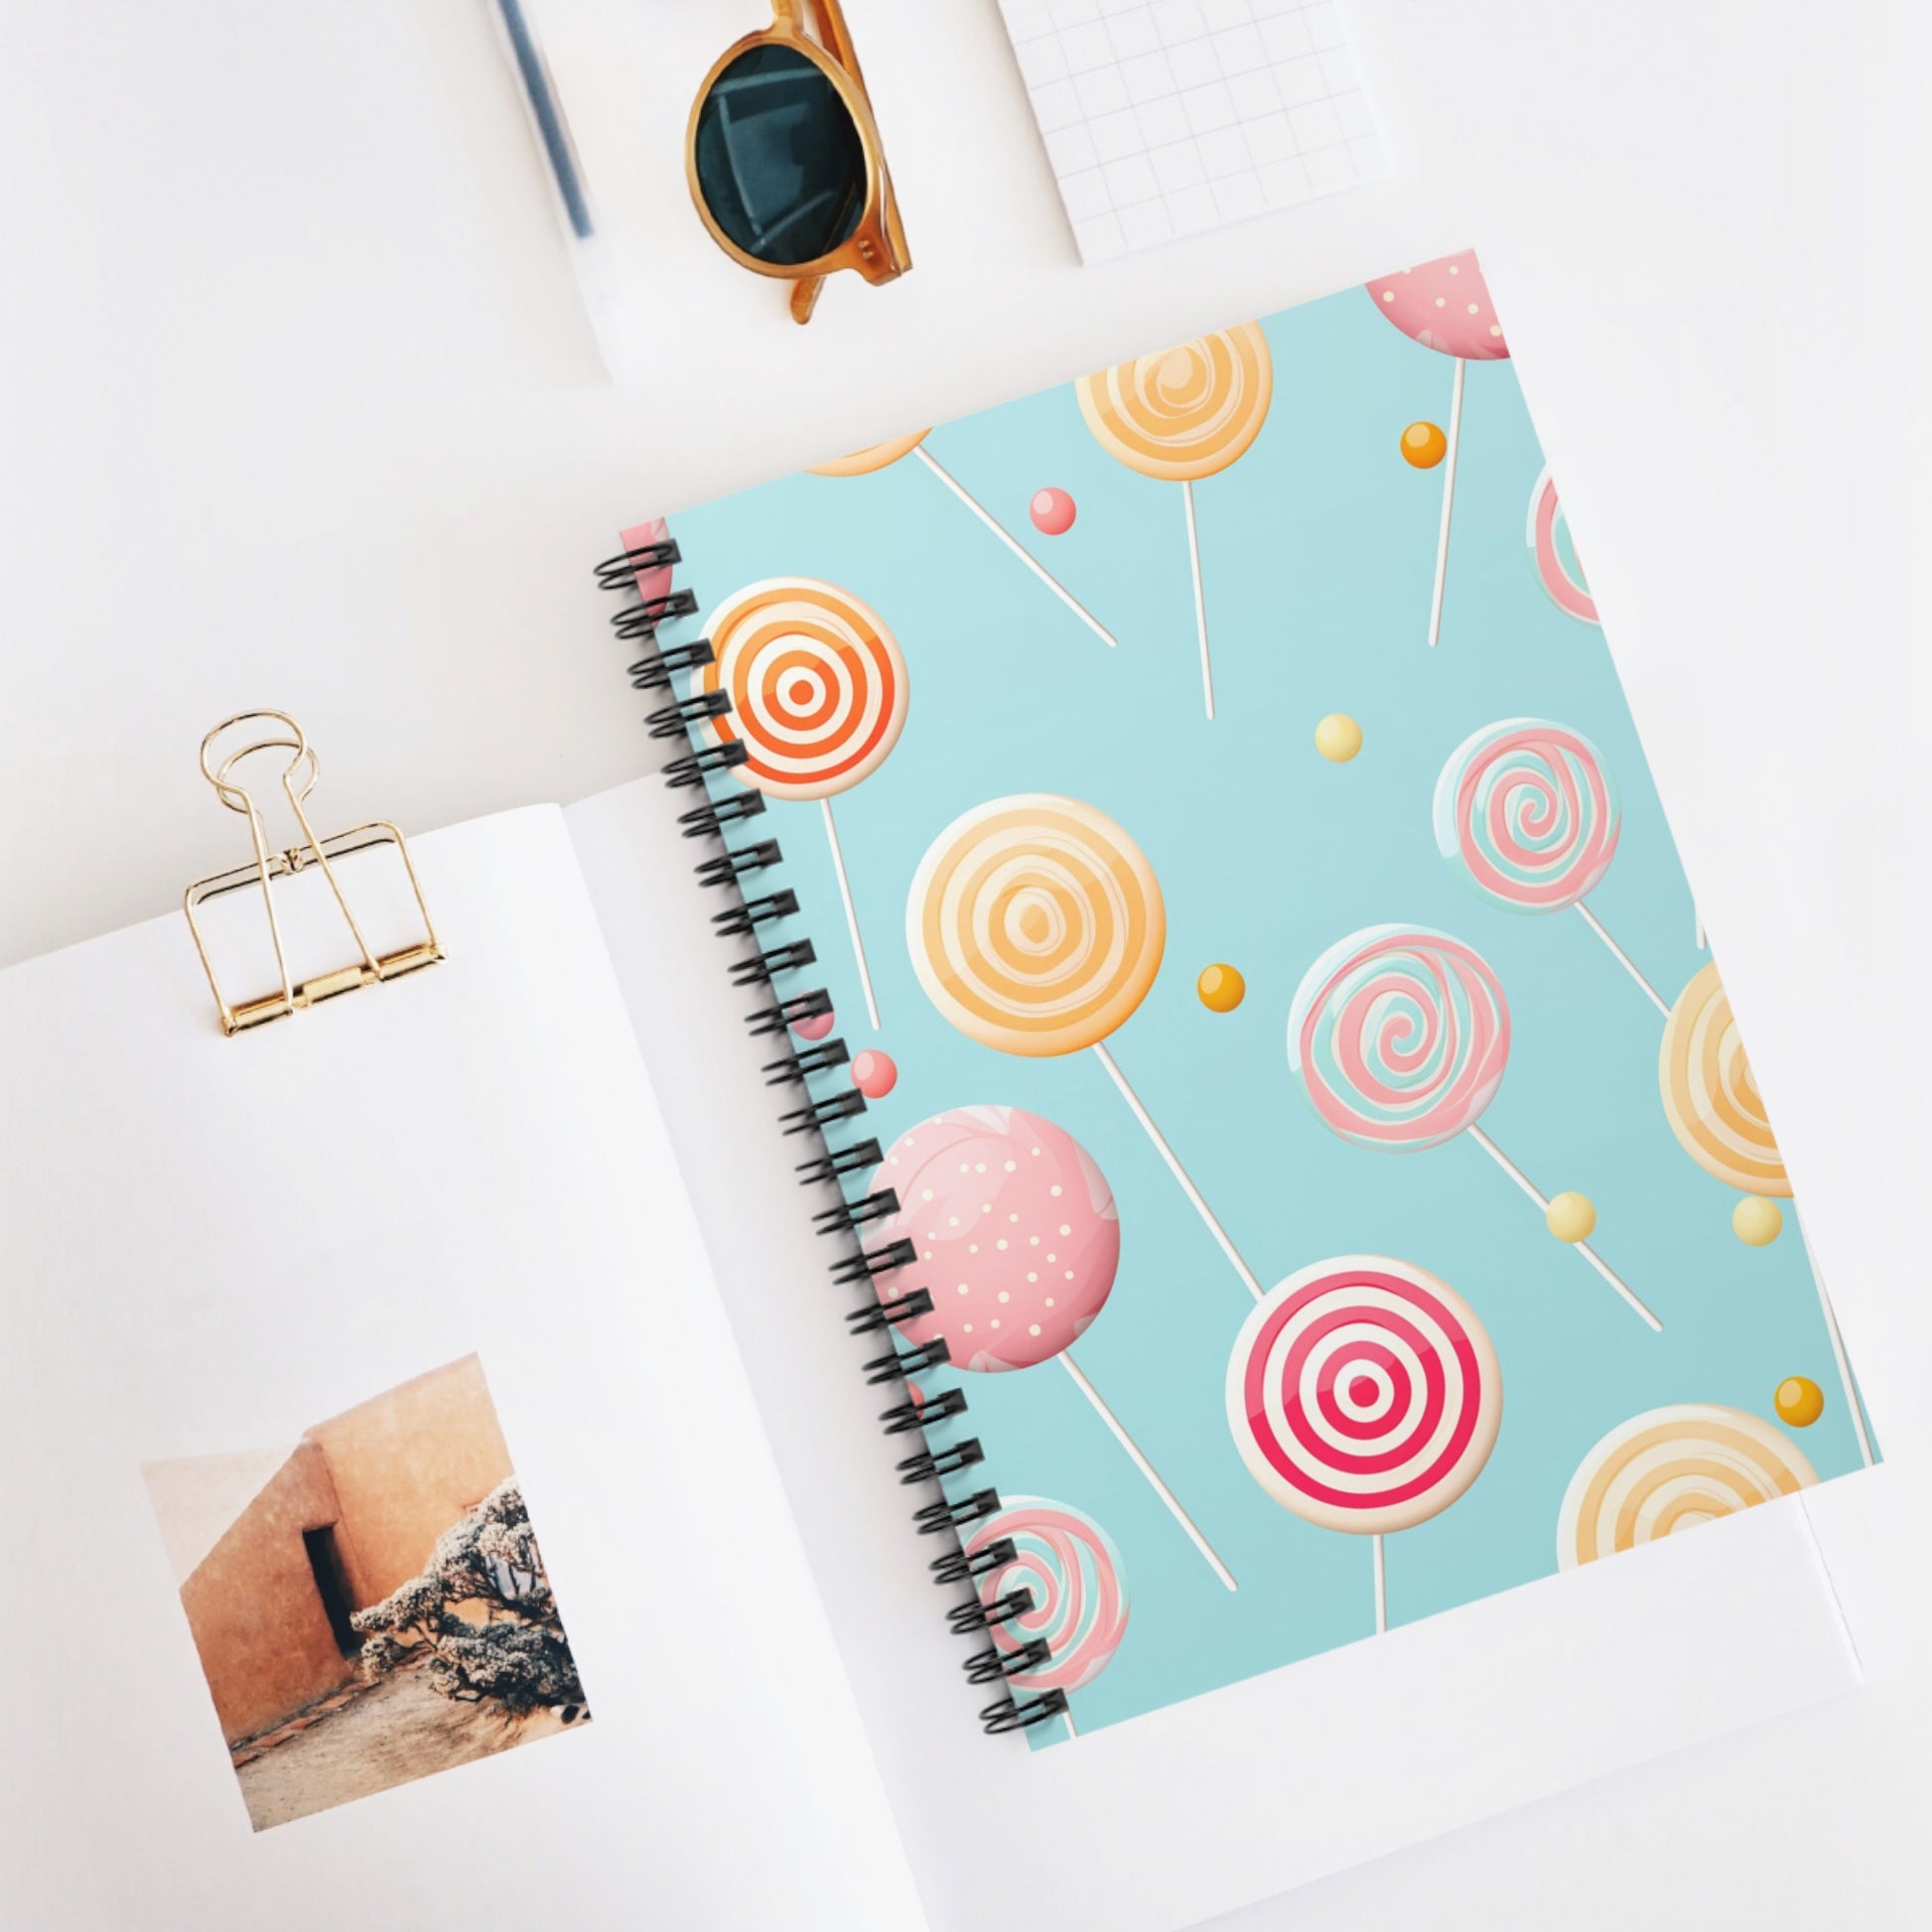 Lollipop Spiral Bound Notebook, Pastel Candy Travel Pattern Design Small Journal Notepad Ruled Line Book Paper Pad Work Aesthetic Starcove Fashion